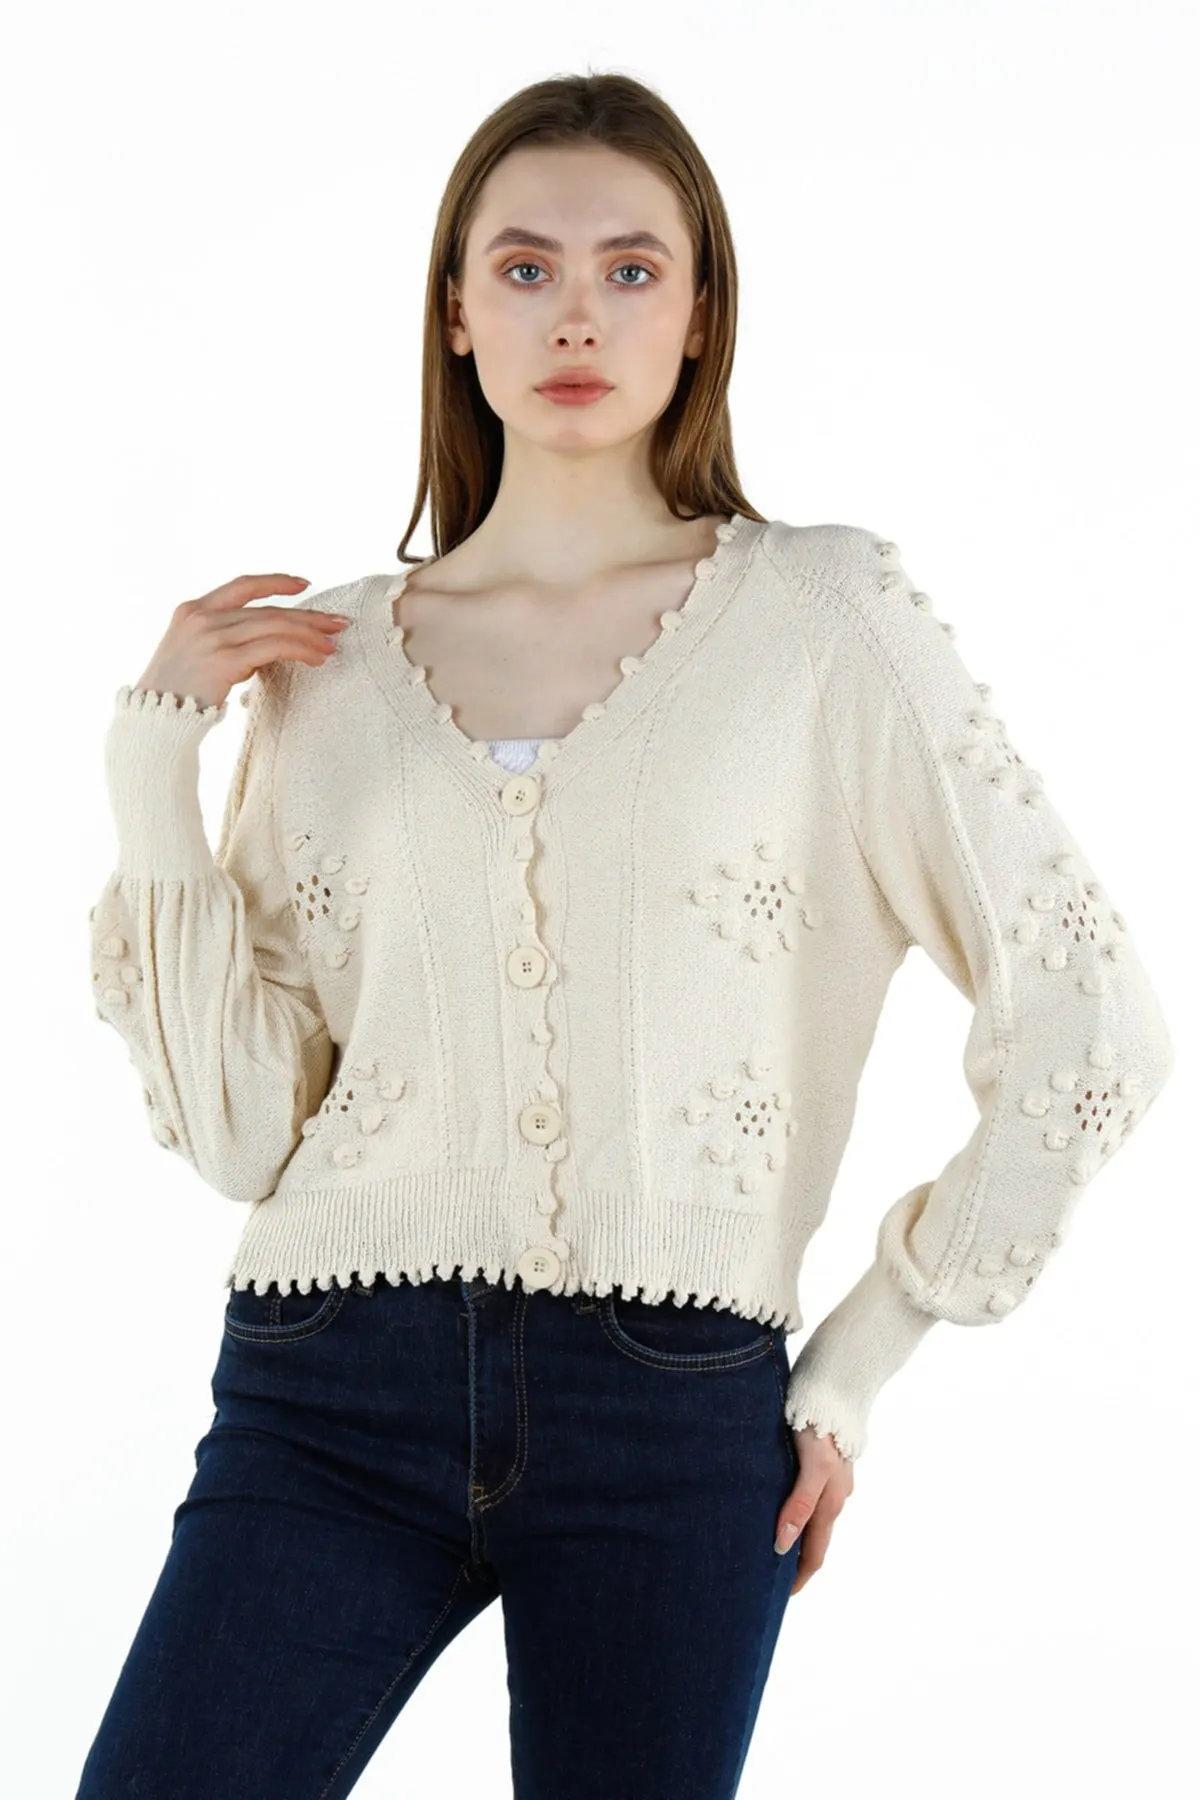 

Women's Cardigan Pompom Patterned Casual Knitted High Quality Fashion Cardigan Sweaters Loose Sweater Jumper